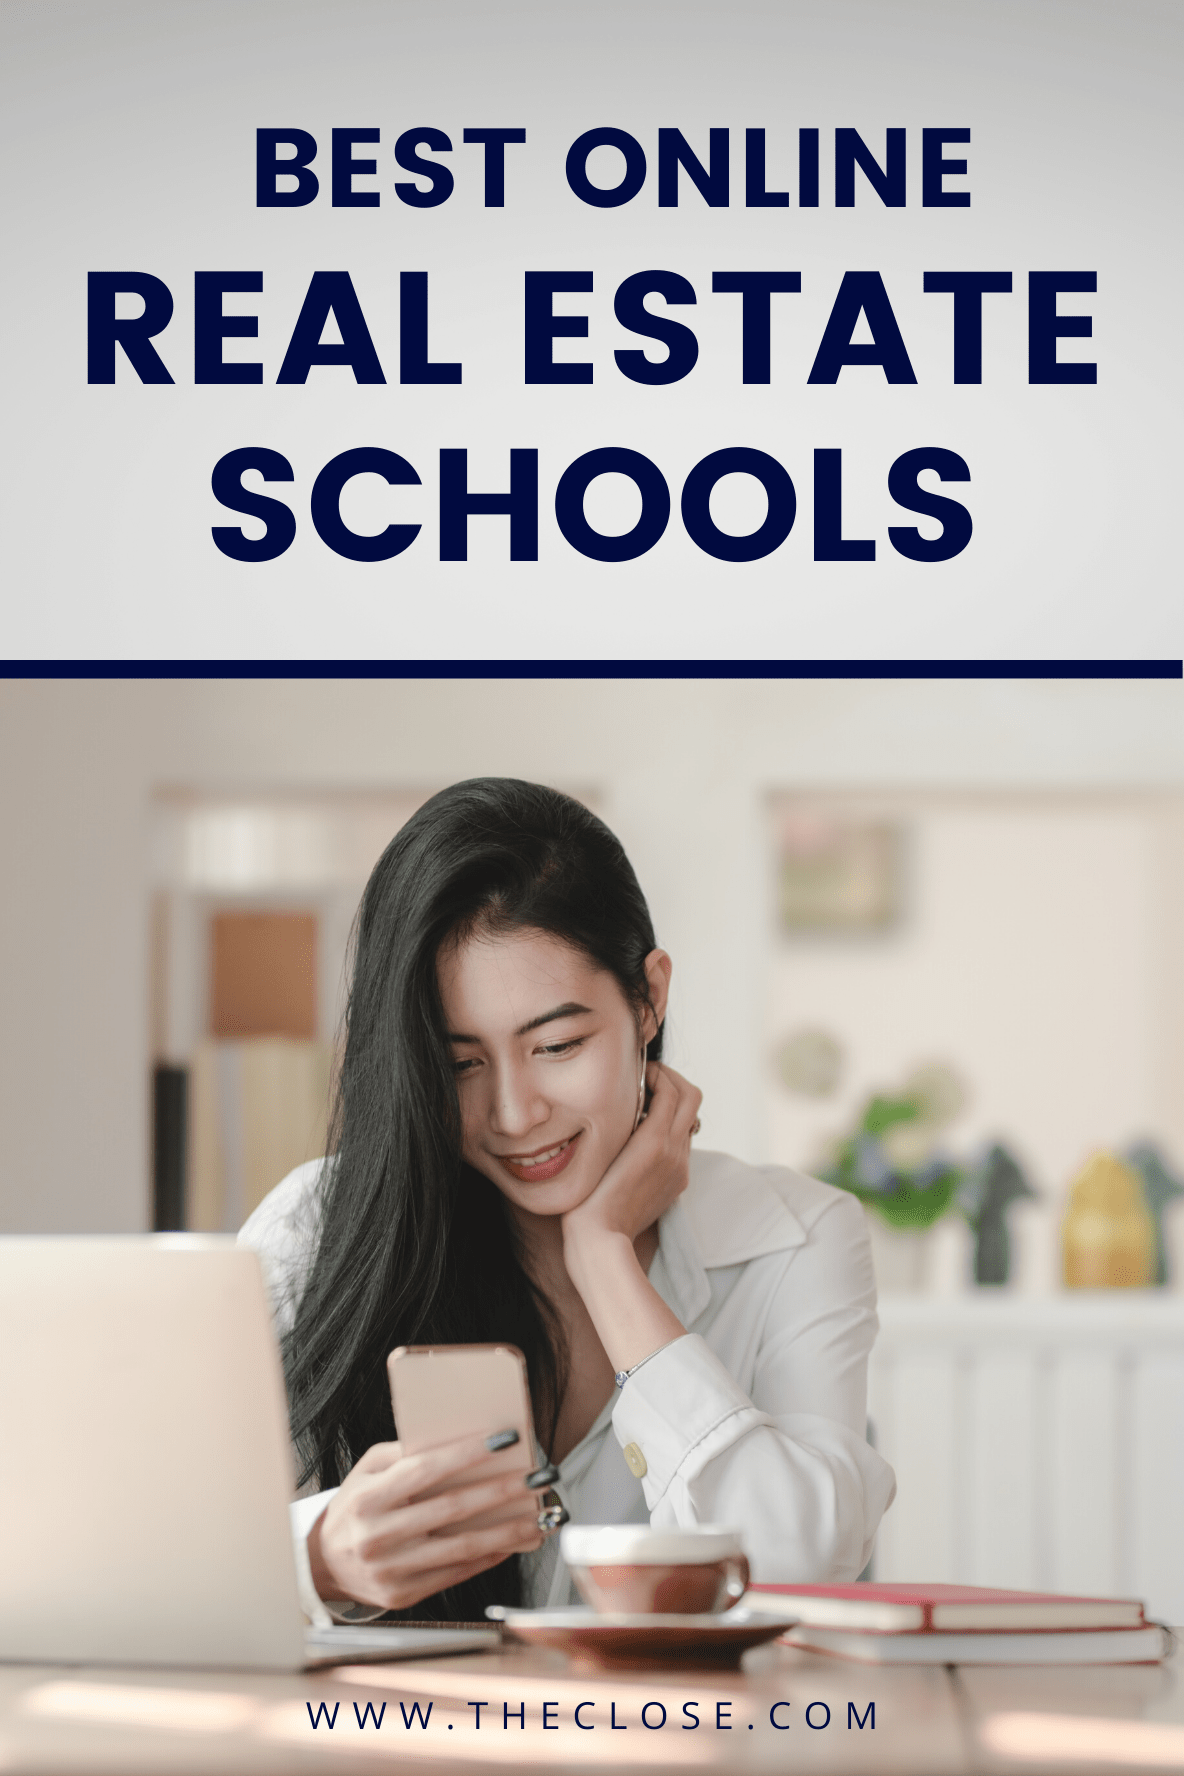 How much does online real estate school cost